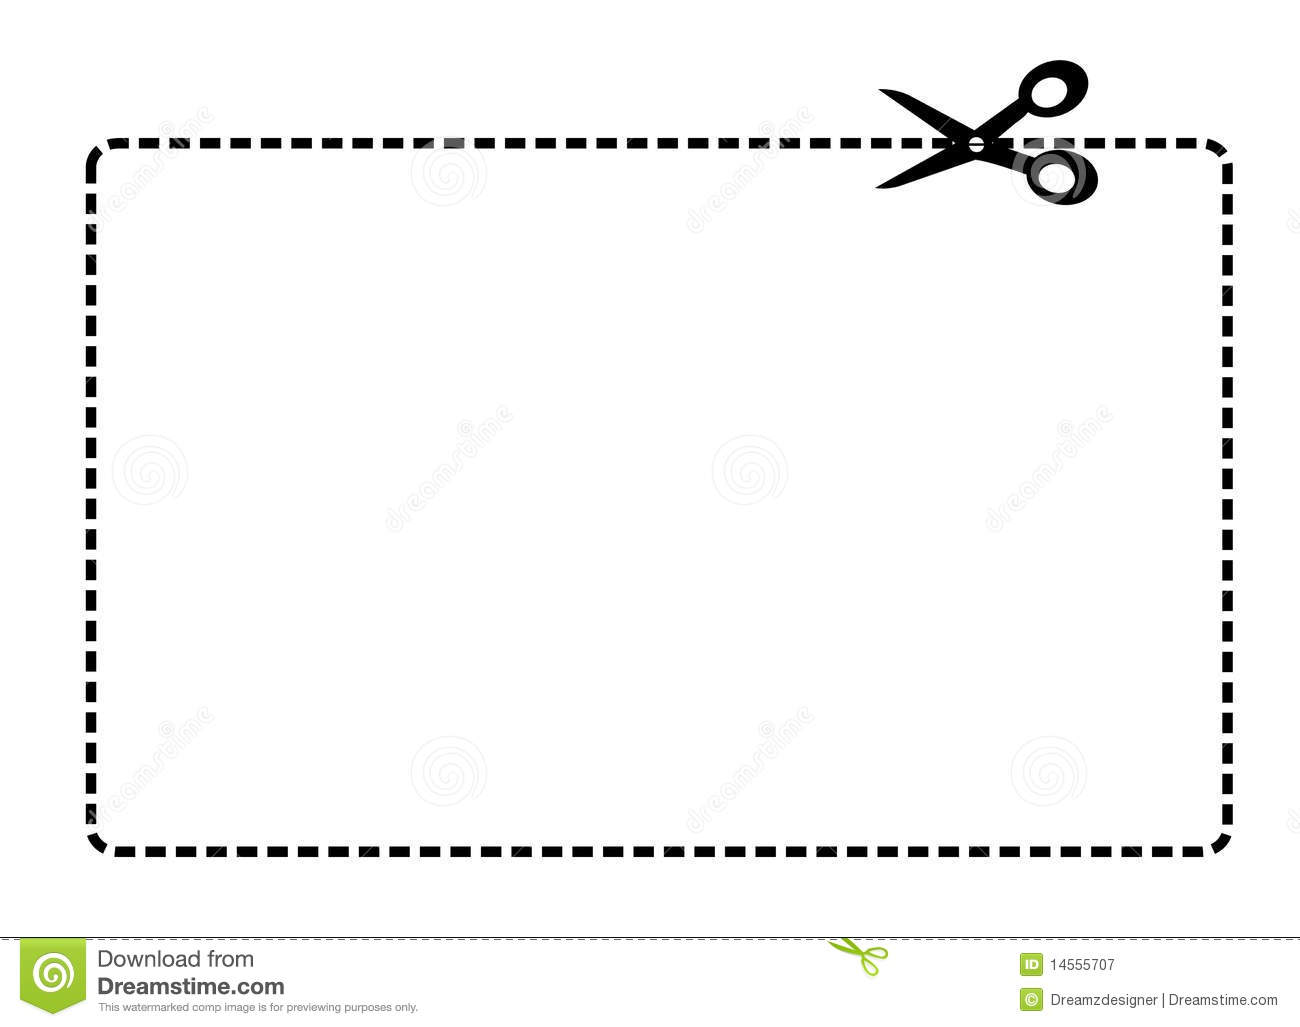 Coupon Border Vector Royalty Free Stock Photography   Image  14555707